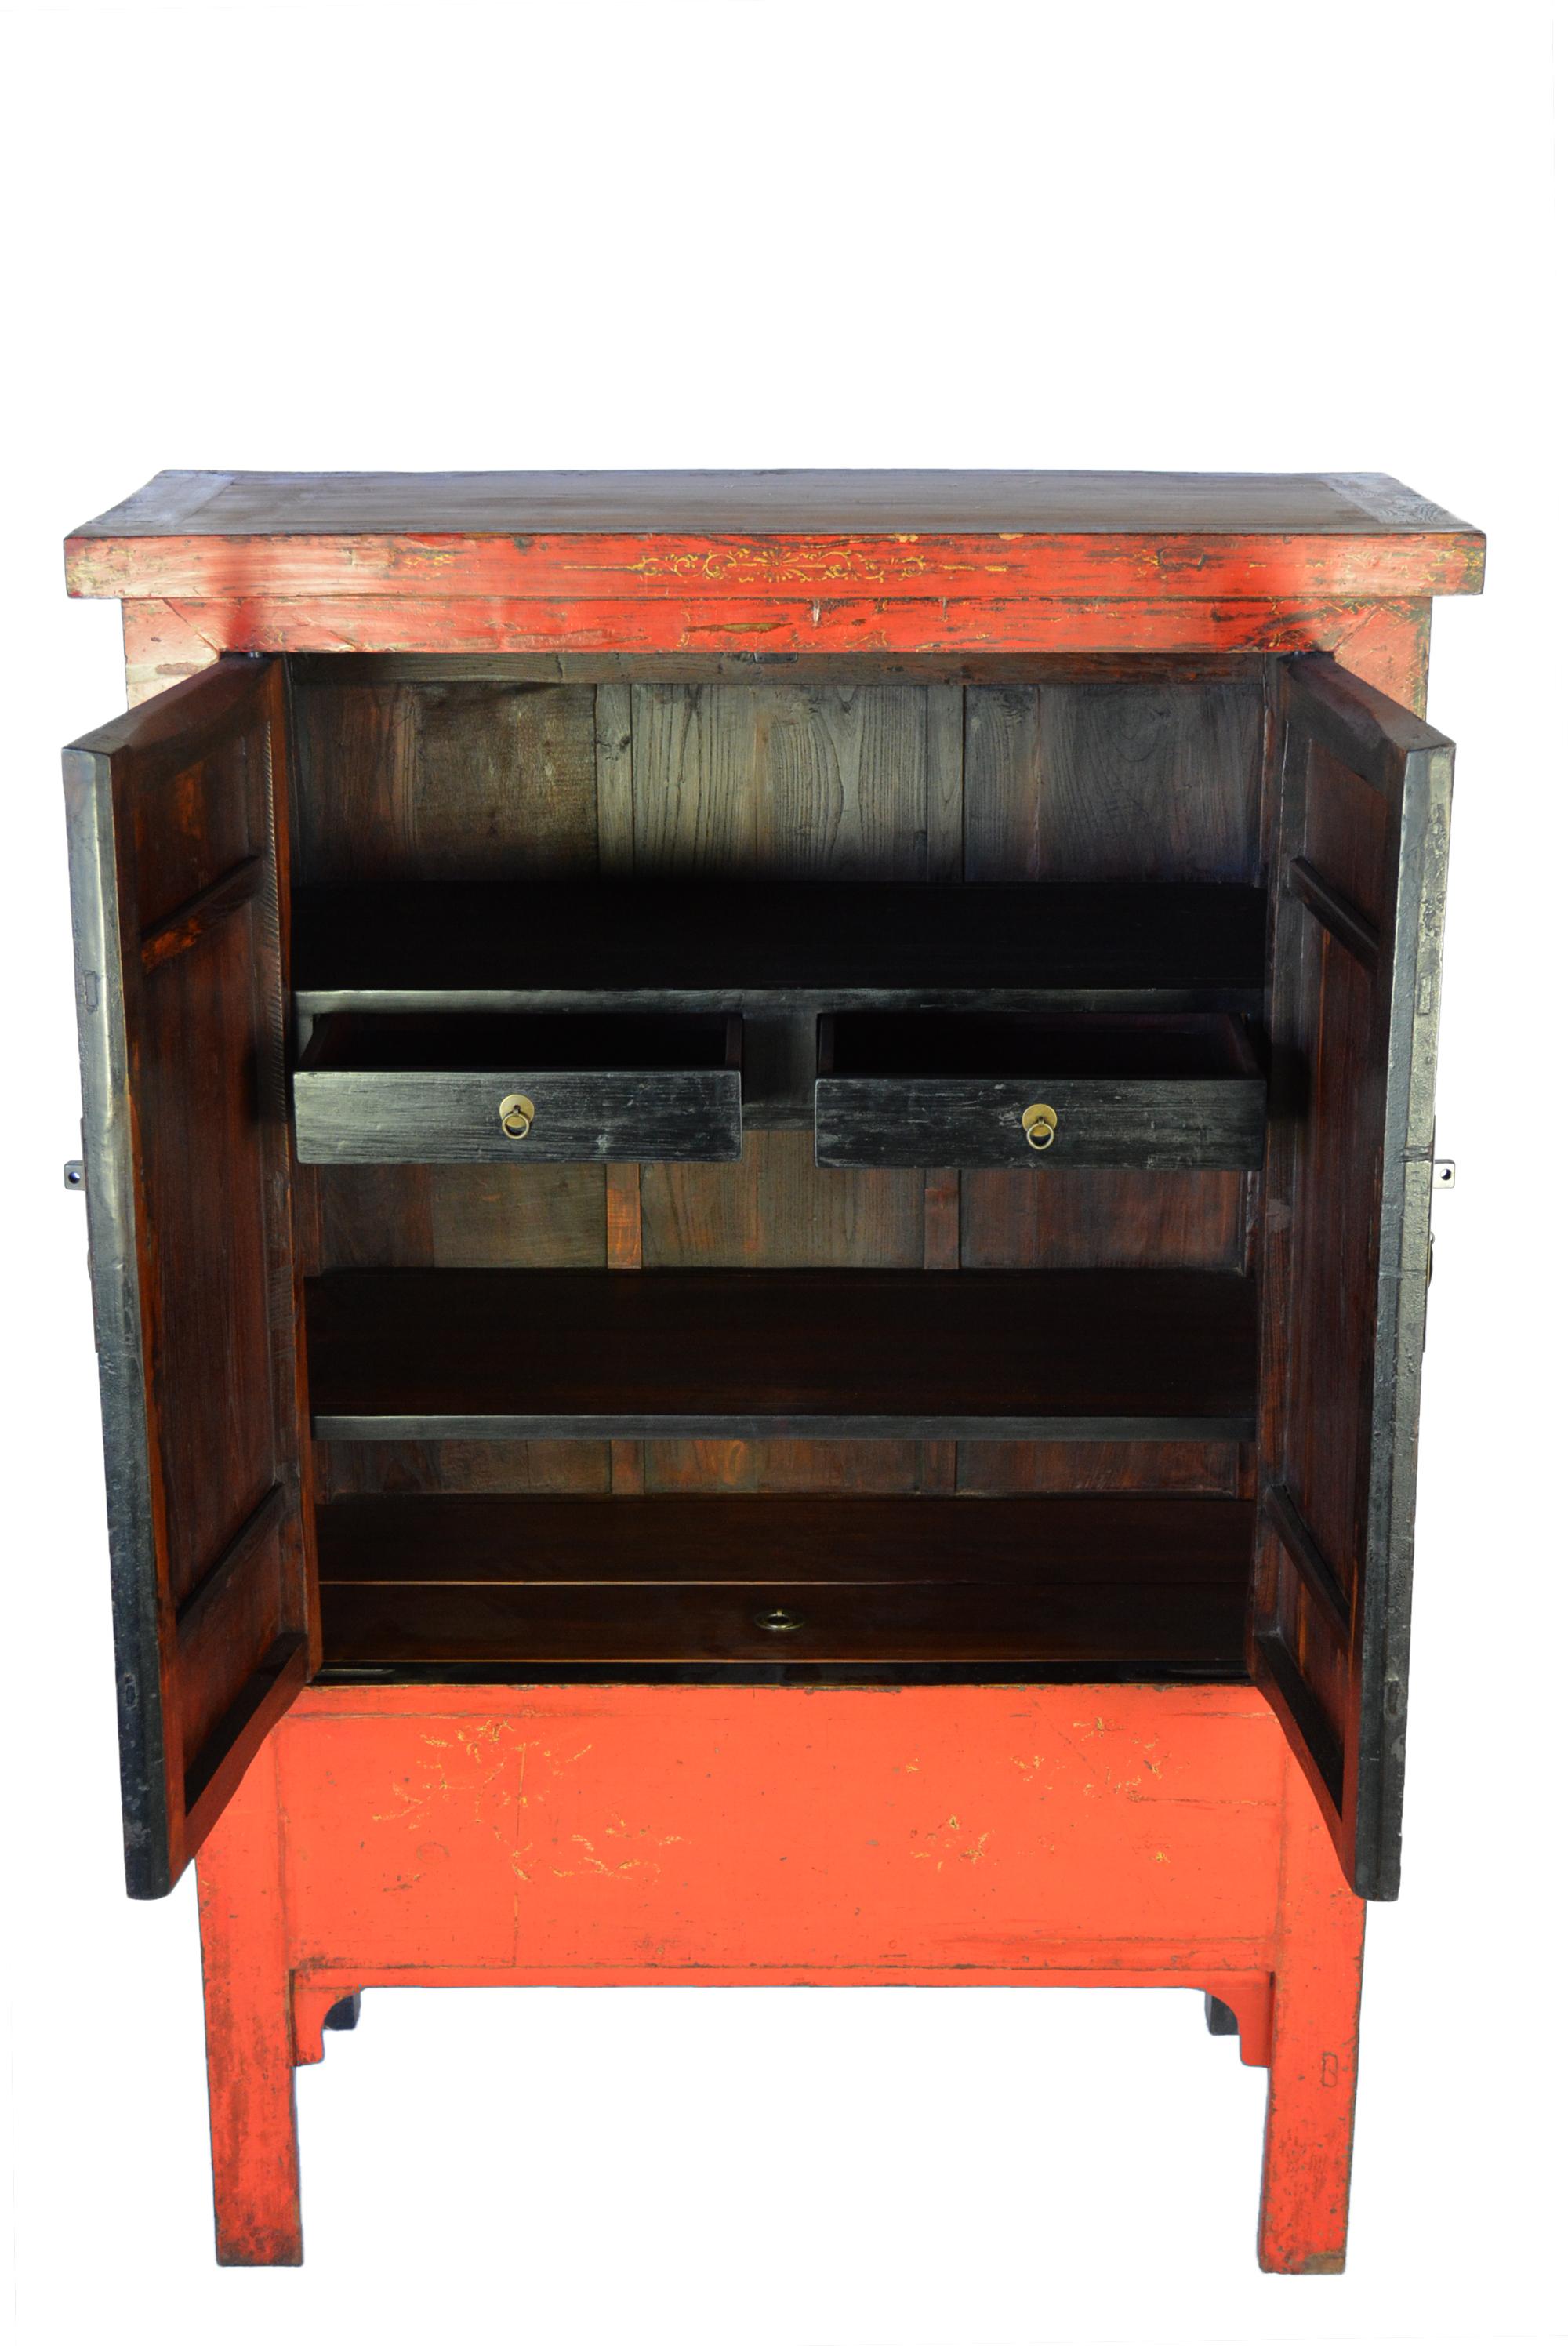 Other Early 19th Century Red Lacquer Cabinet For Sale